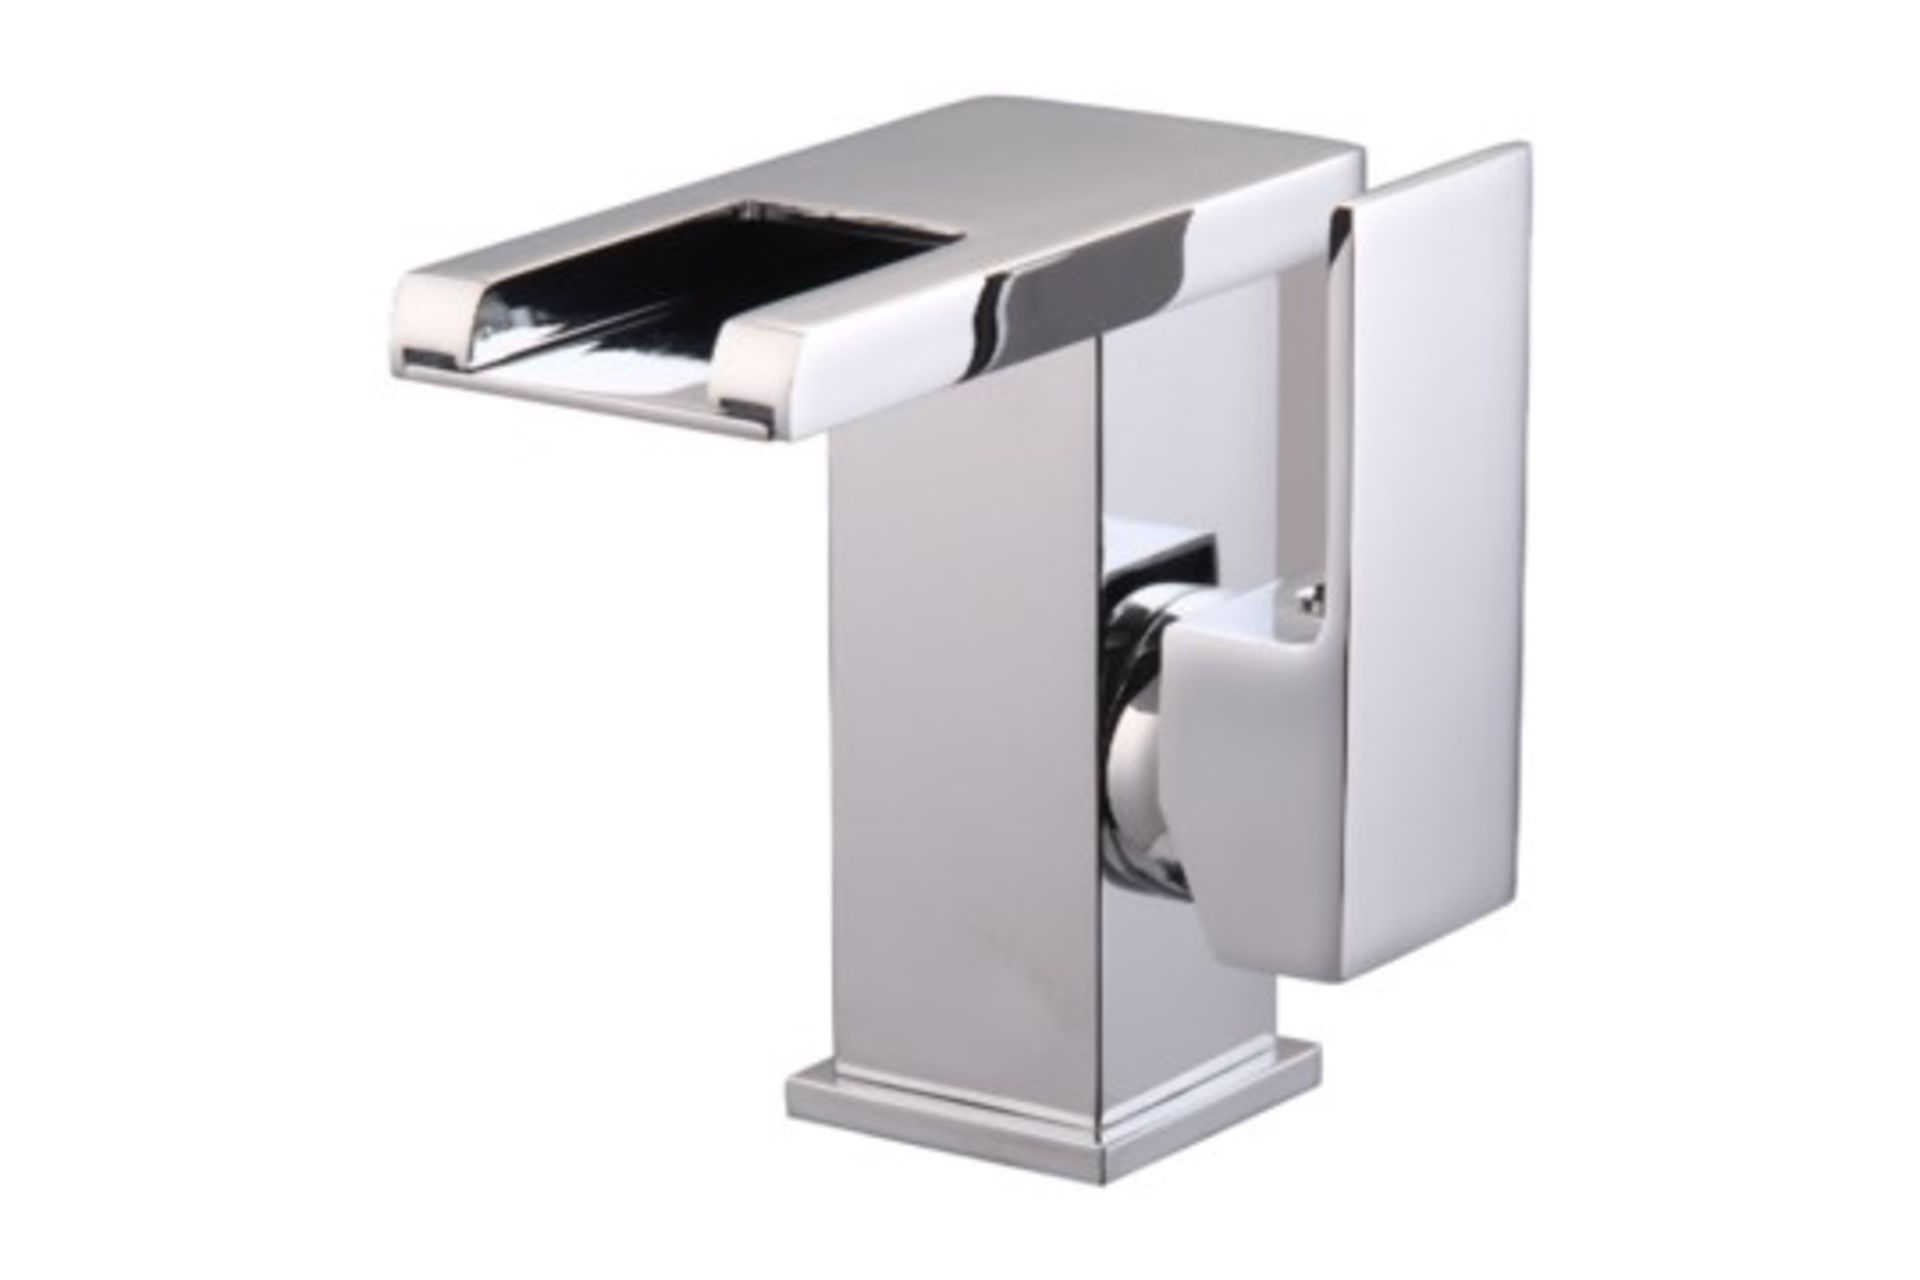 LED Waterfall Bathroom Basin Mixer Tap. RRP £229.99.Easy to install and clean. All copper moun... - Image 3 of 3